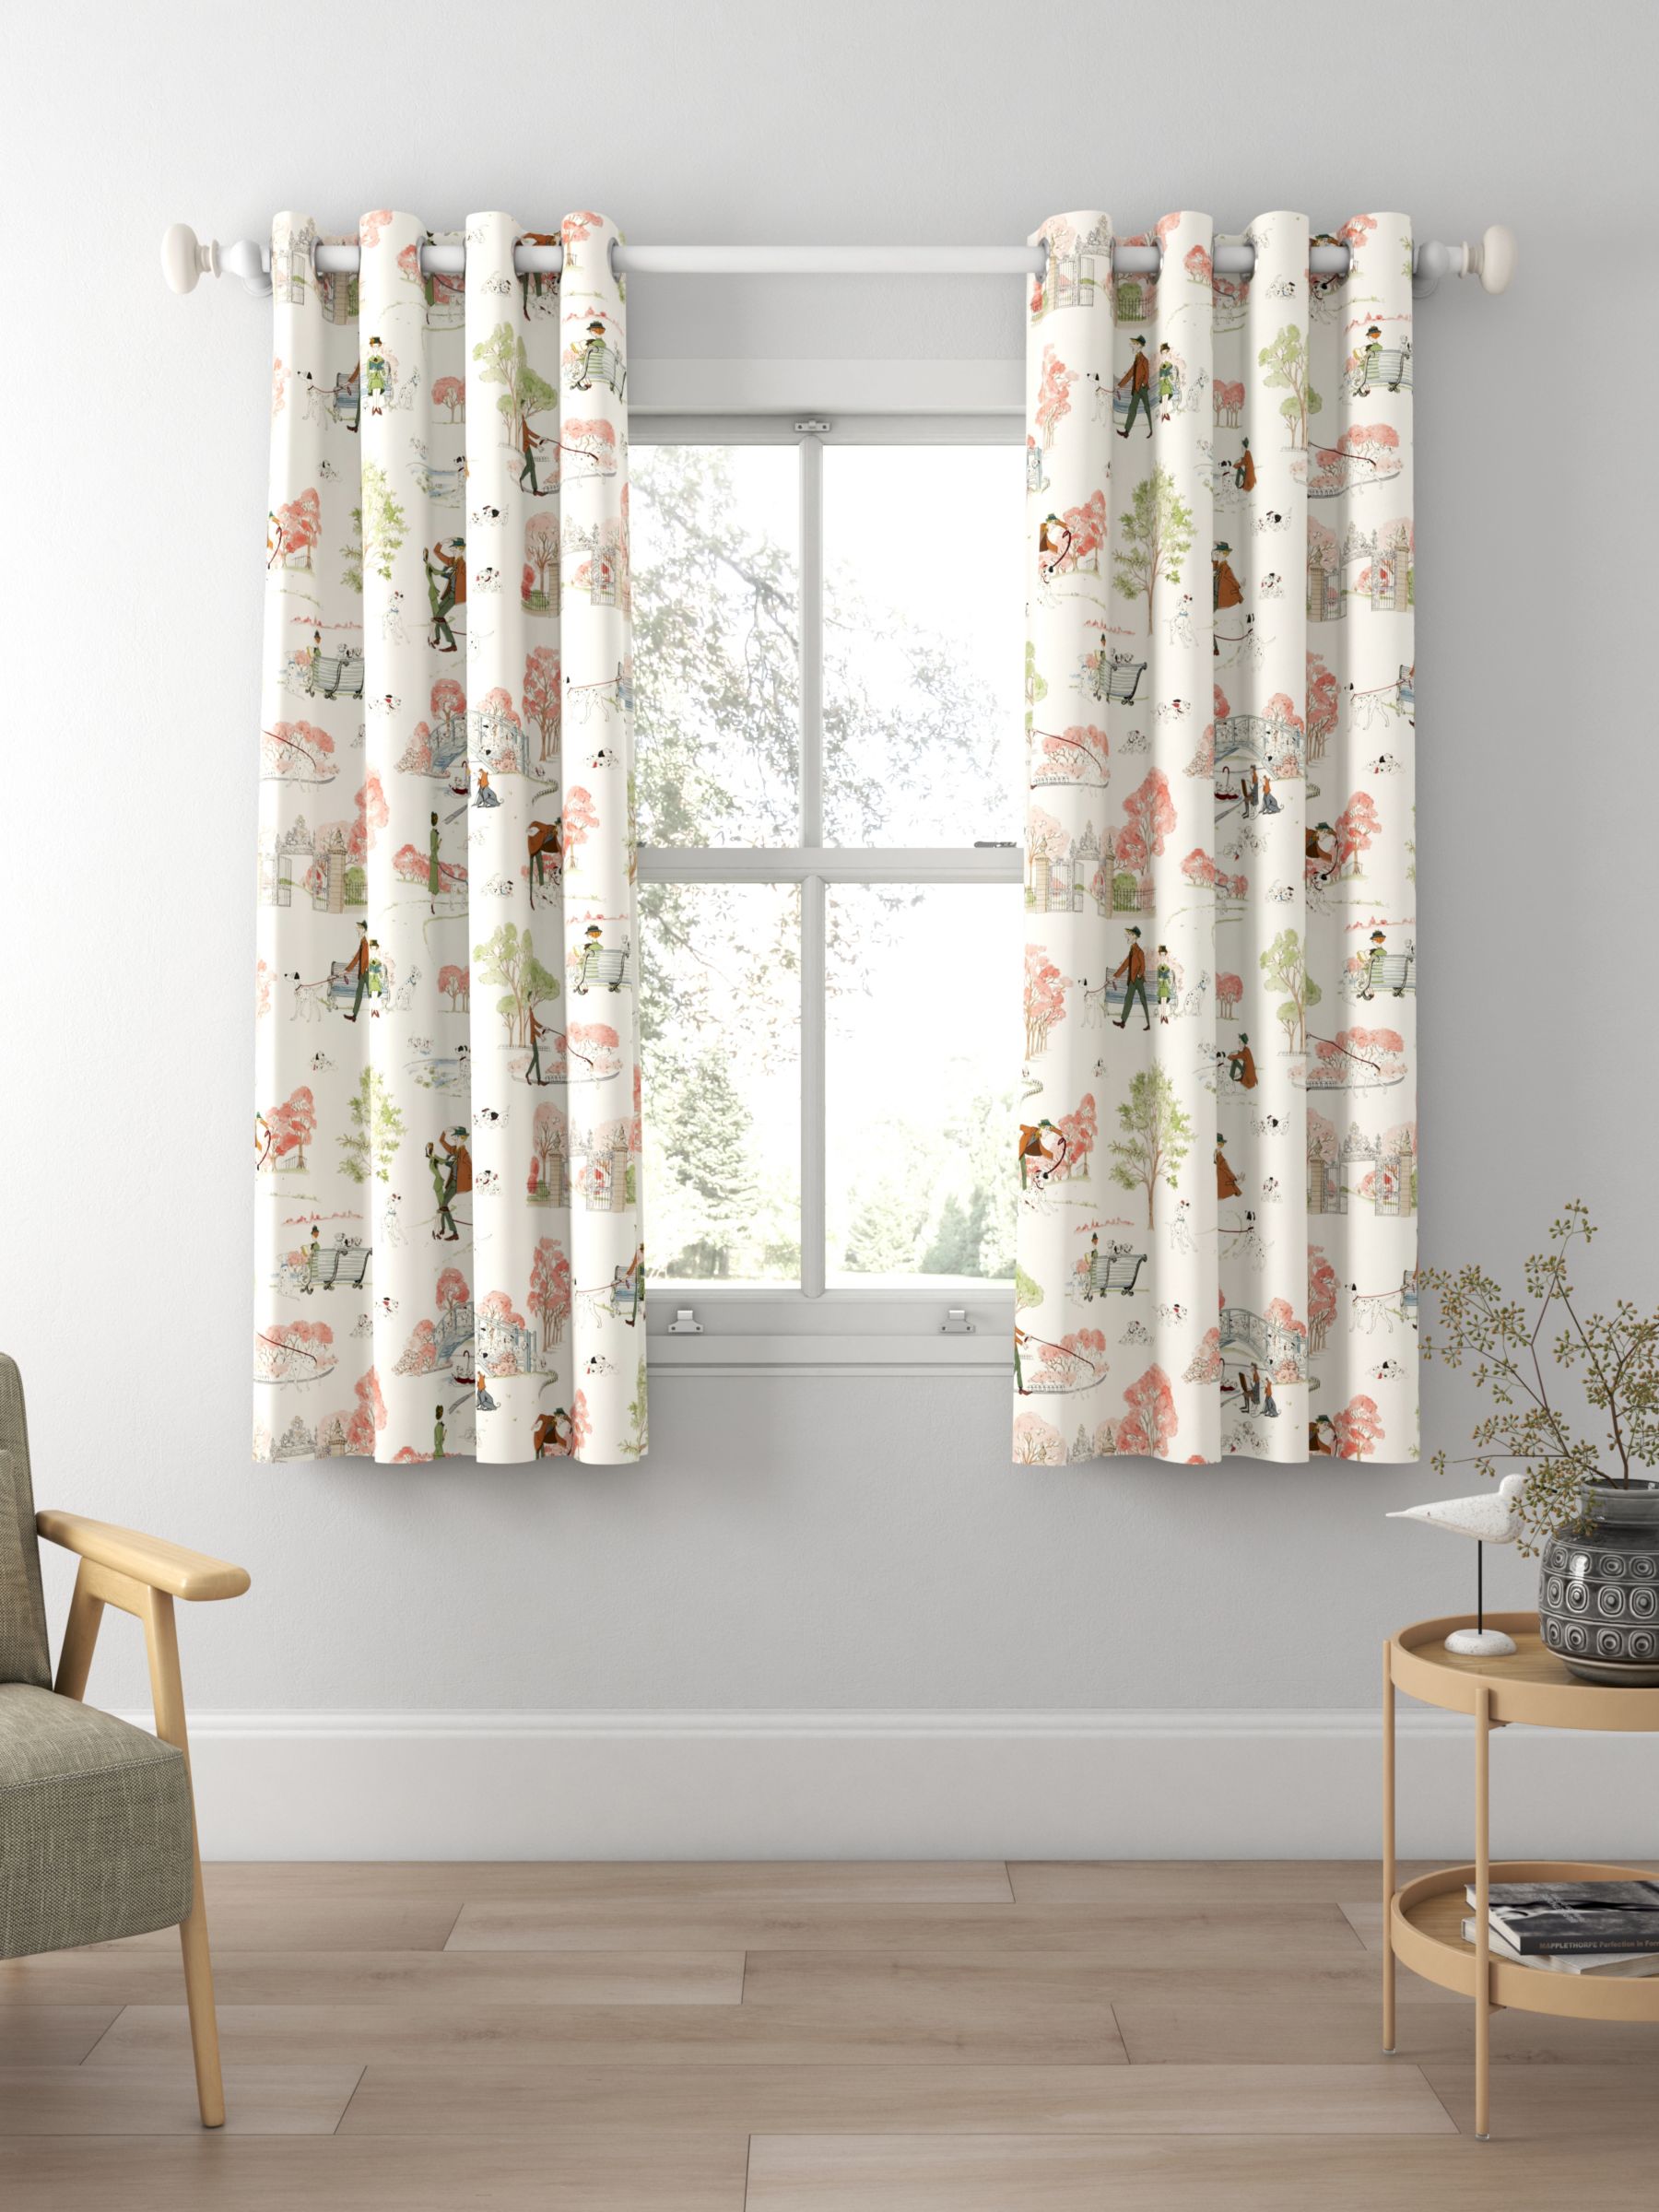 Sanderson 101 Dalmatians Made to Measure Curtains, Candy Floss